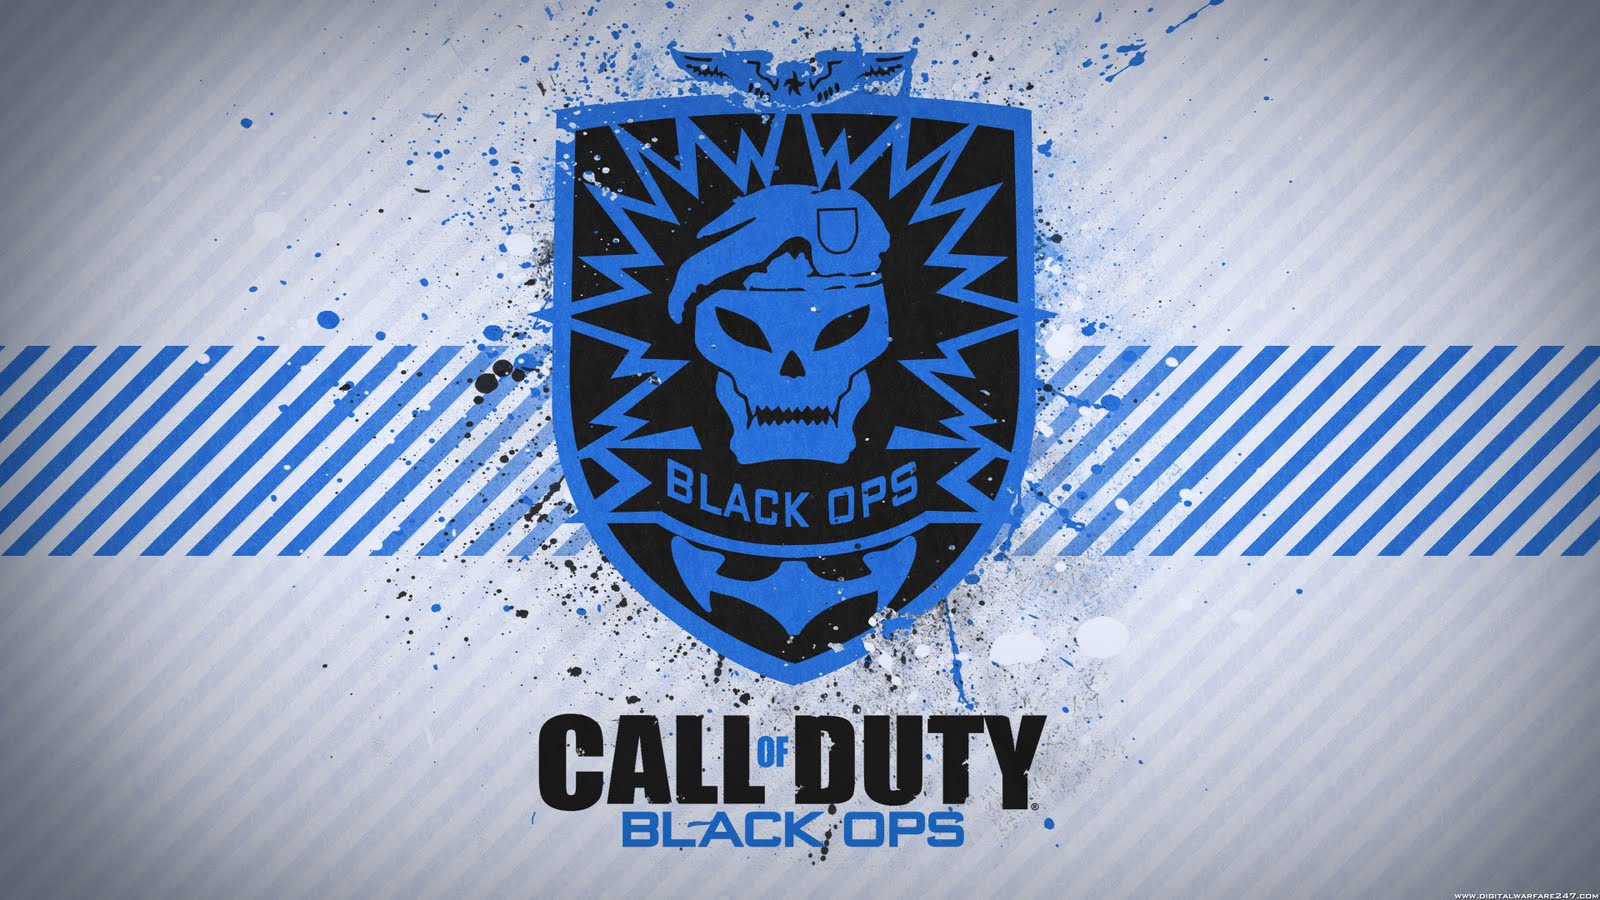 HD WALLPAPERS Call of Duty Black Ops HD Wallpapers 1600x900